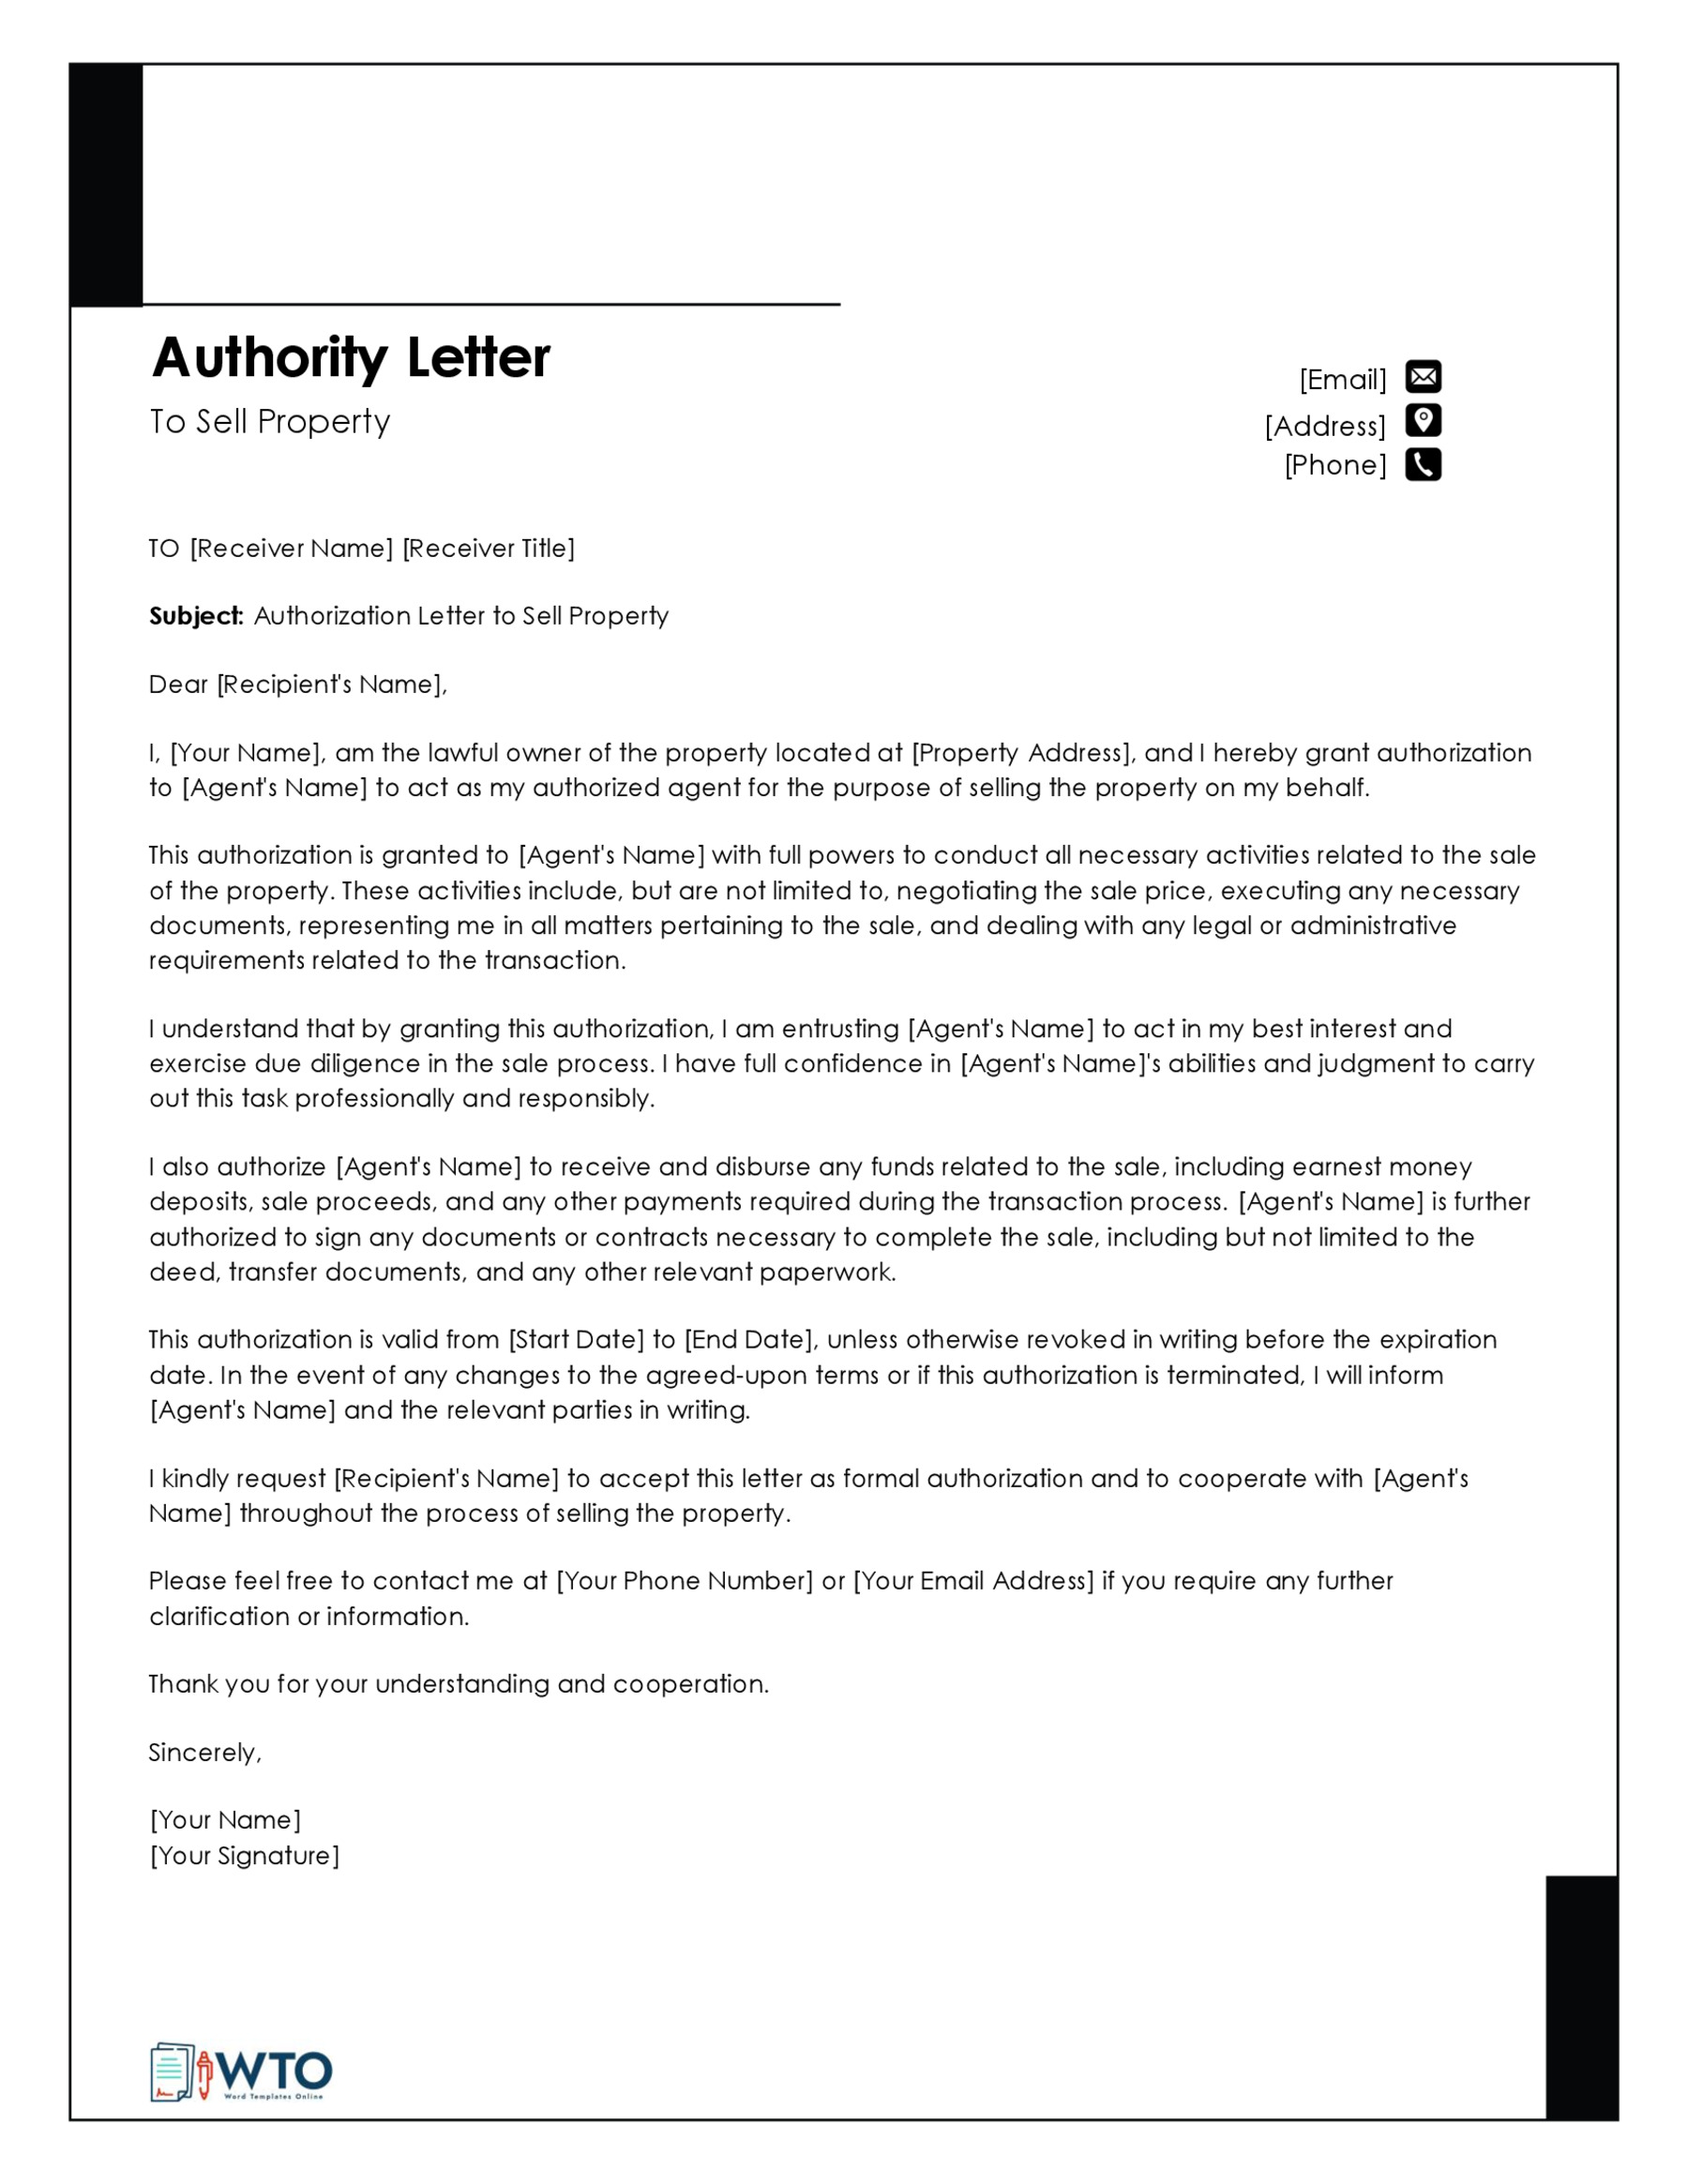 Authorization Letter to Sell Property-Word Template for Free